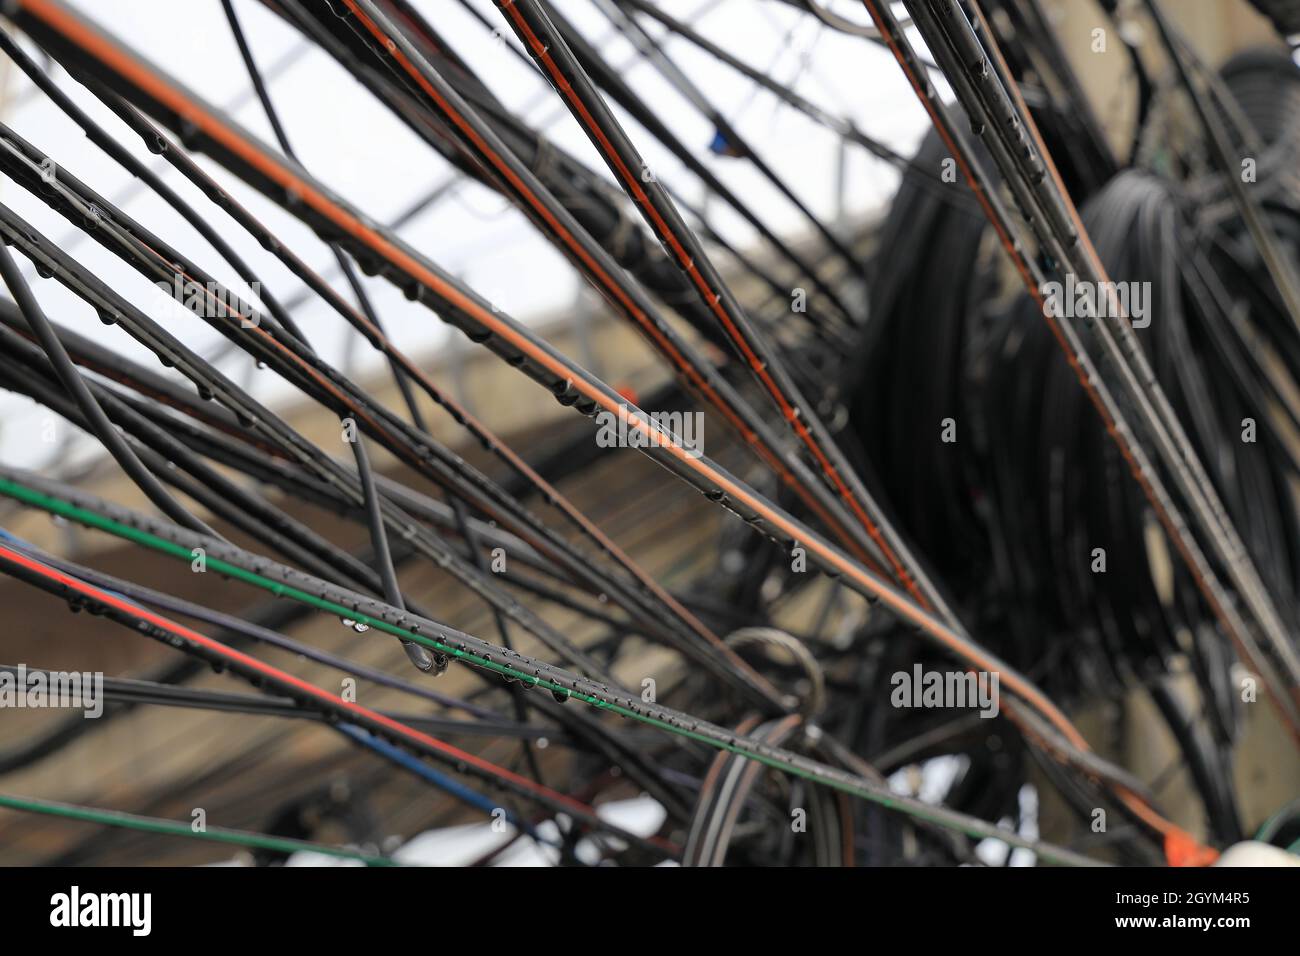 disorderly  Electric and signal wires on a post in city, messy of electrical wires and internet fiber signal line on electric poles. Stock Photo